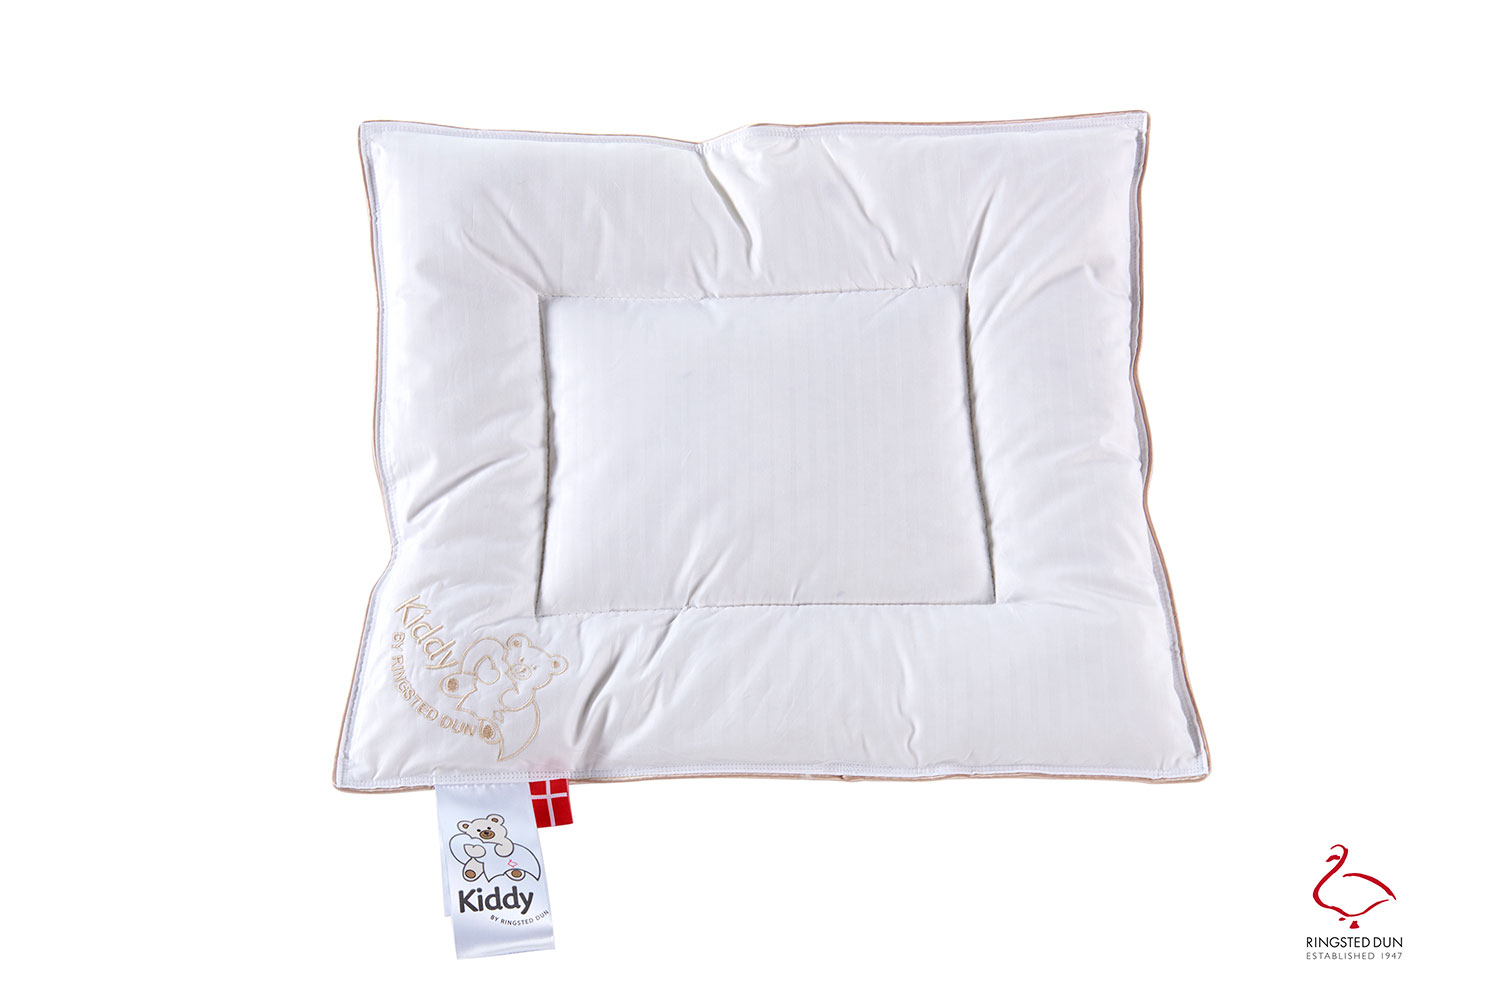 Kiddy Royal Allergy Friendly Baby Duvet And Pillow From Ringsted Dun